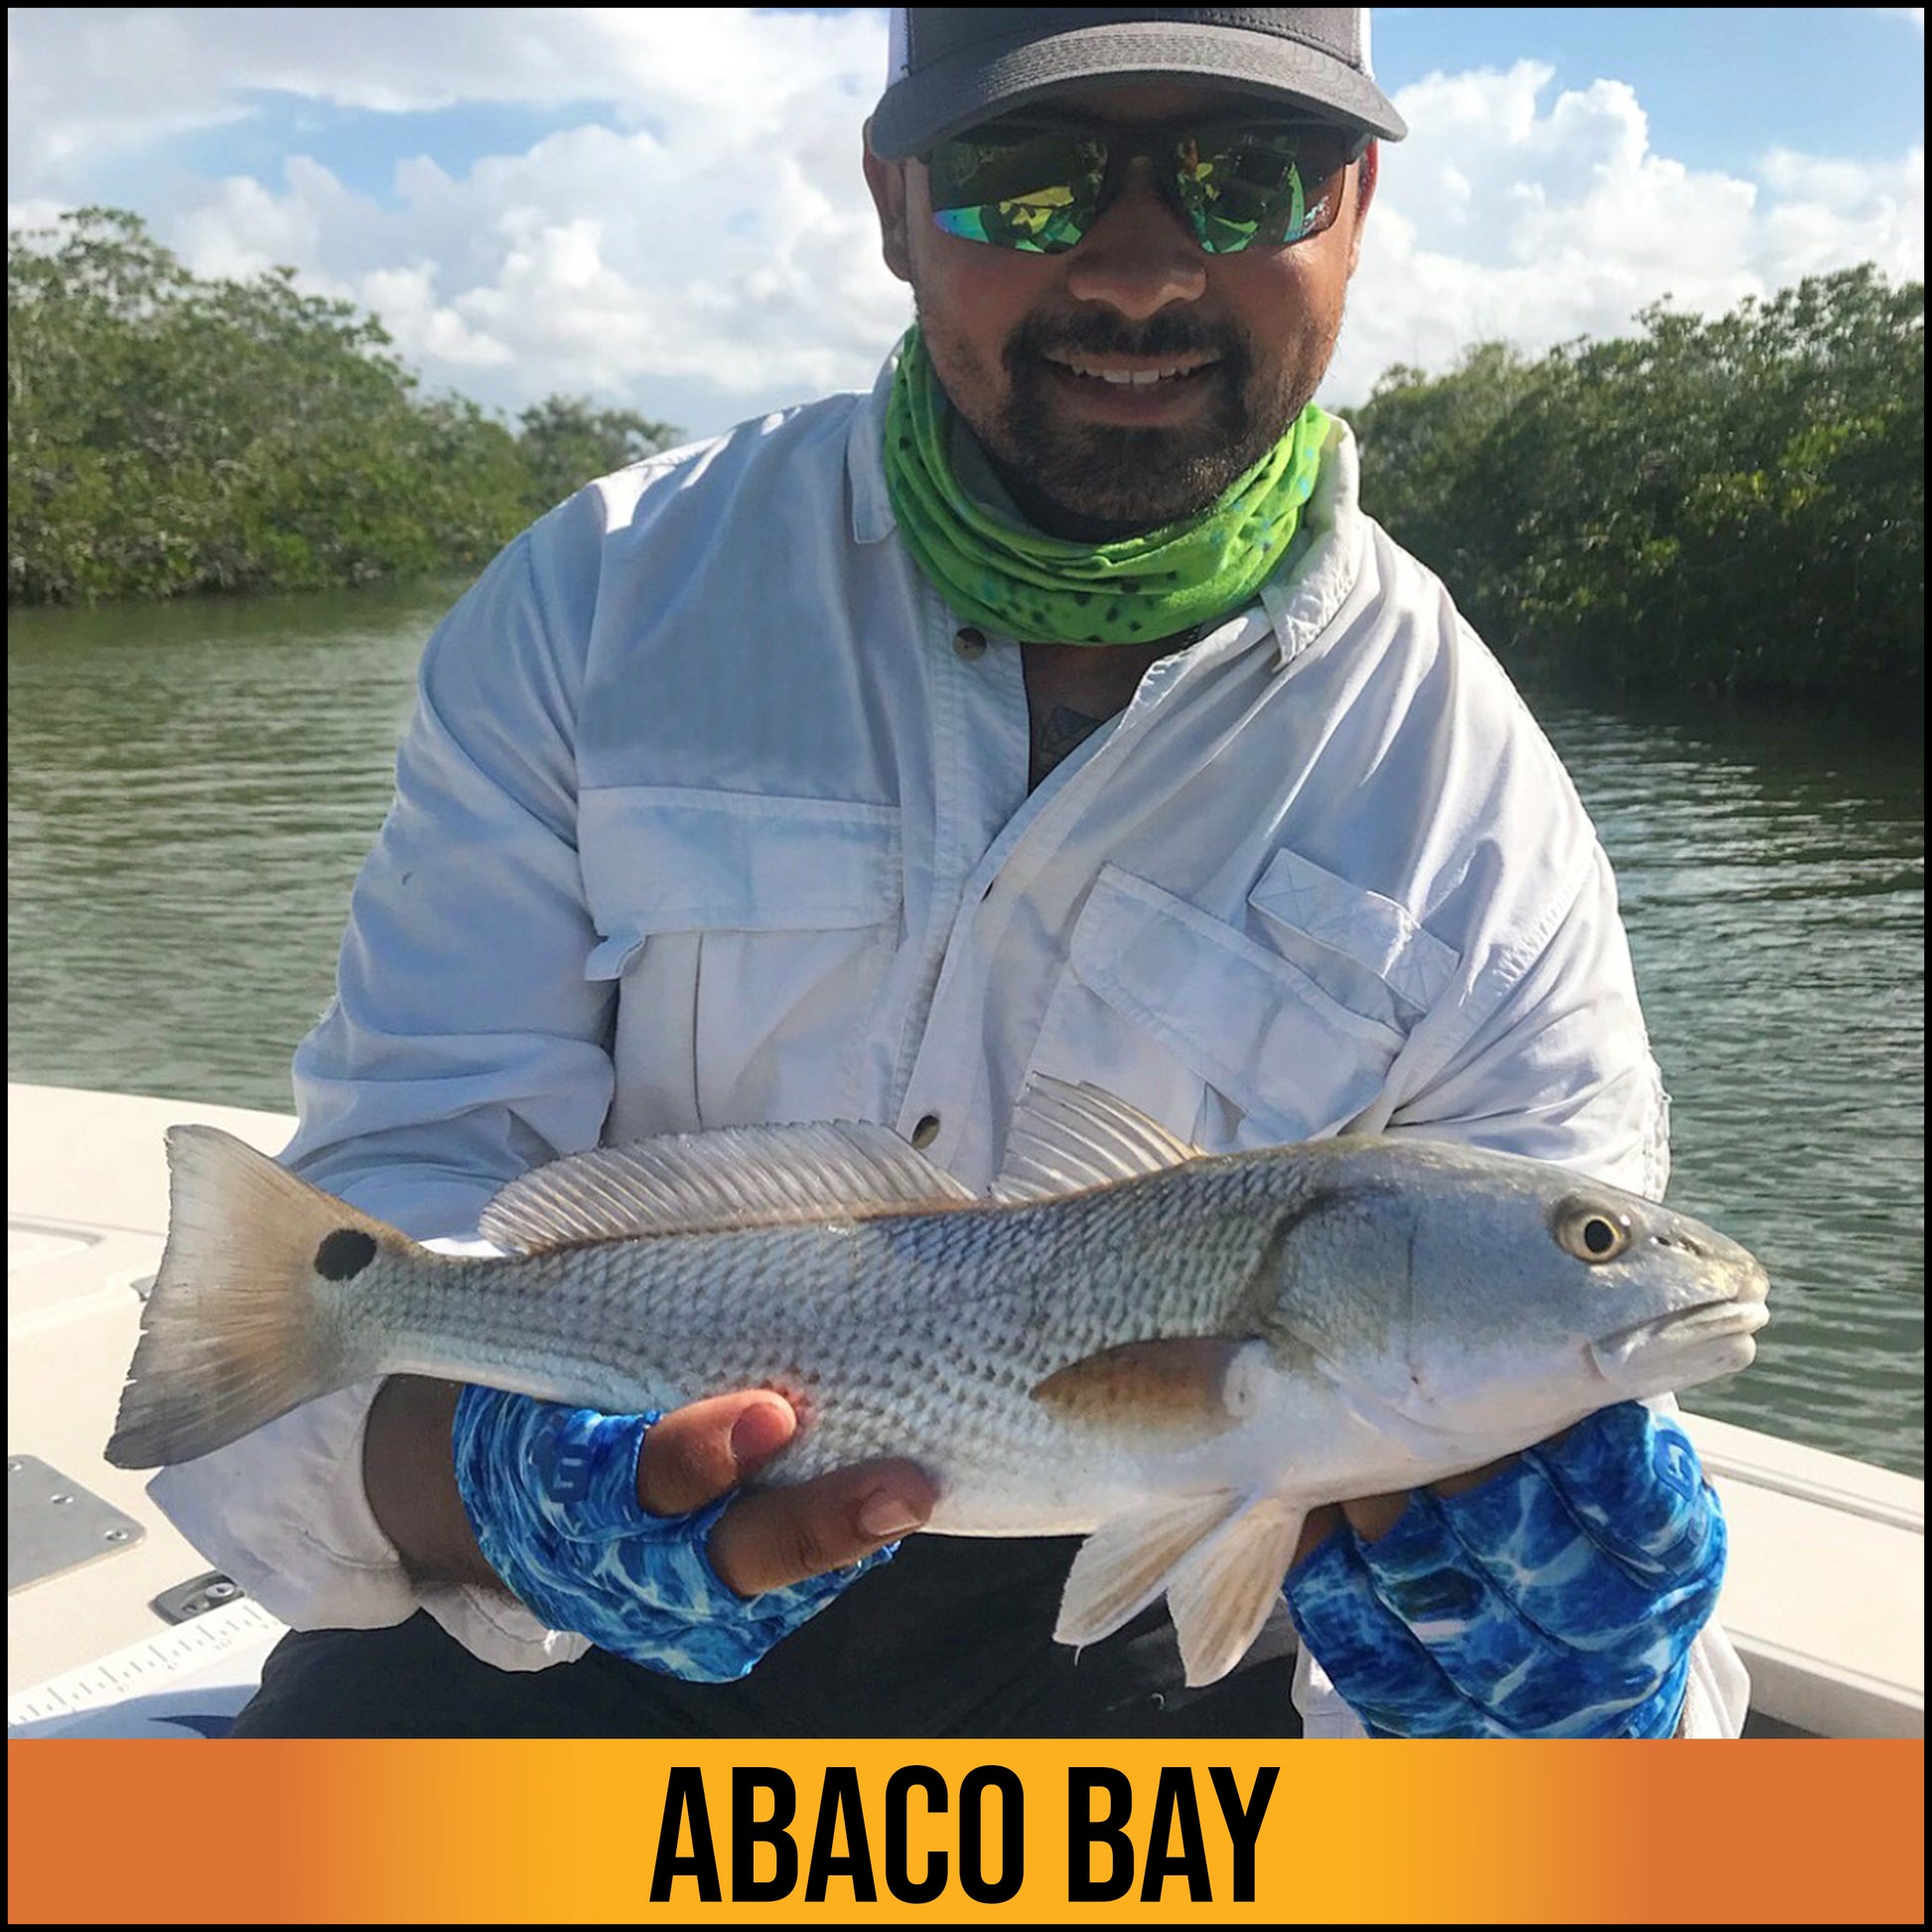 The Abaco Bay Sun Glove is the most popular model in our sun protection line. Independently tested and verified, it is rated at the maximum protection of UPF 50+. Providing both hand and wrist protection, this glove is great for any of your outdoor adventures. 4